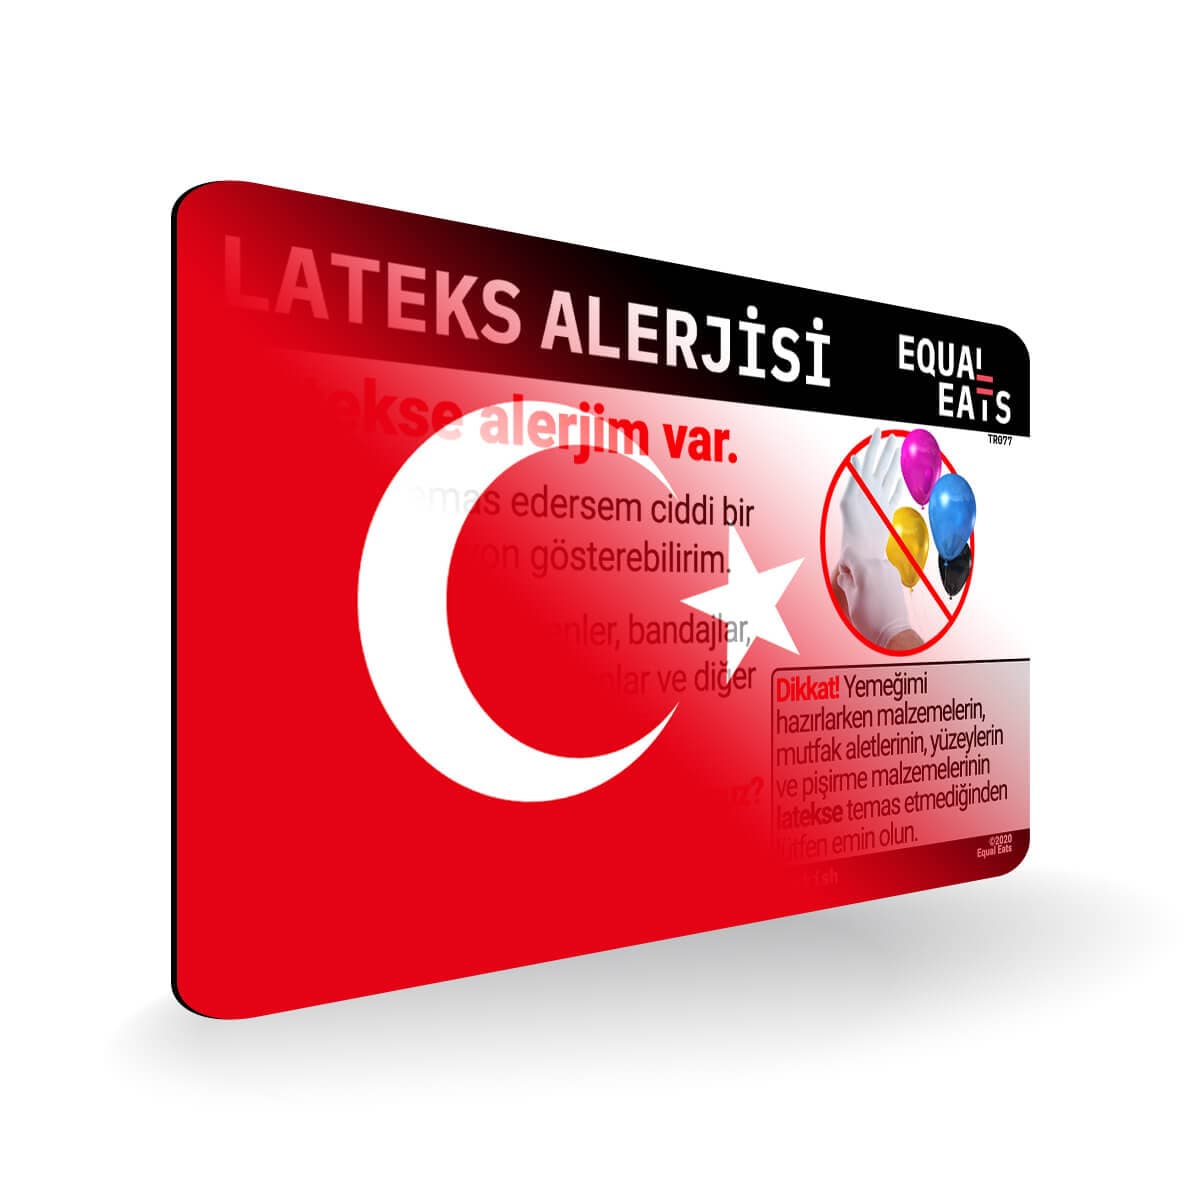 Latex Allergy in Turkish. Latex Allergy Travel Card for Turkey